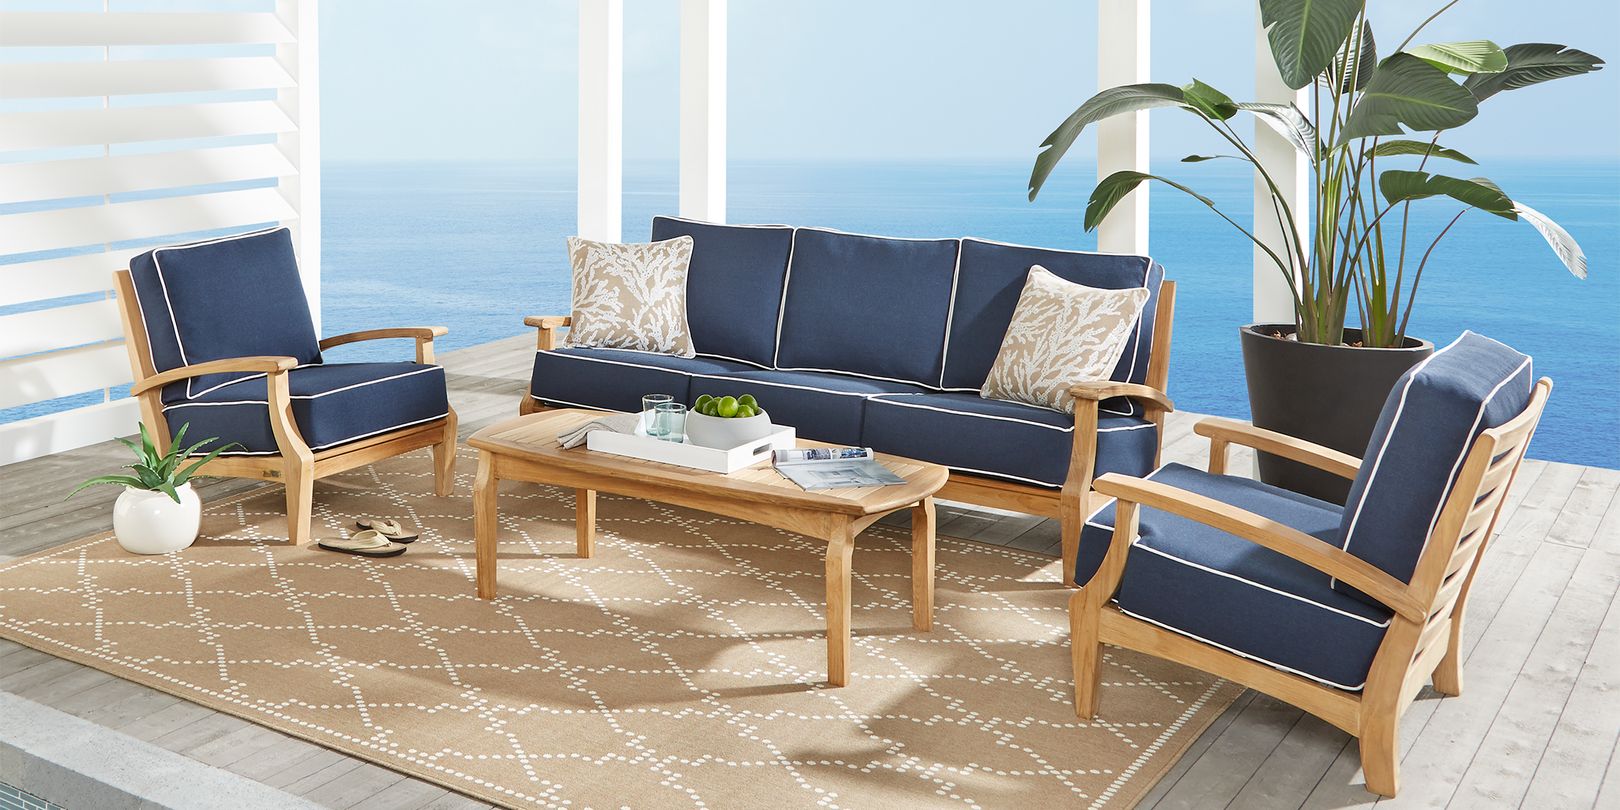 photo of outdoor seating set with blue cushions